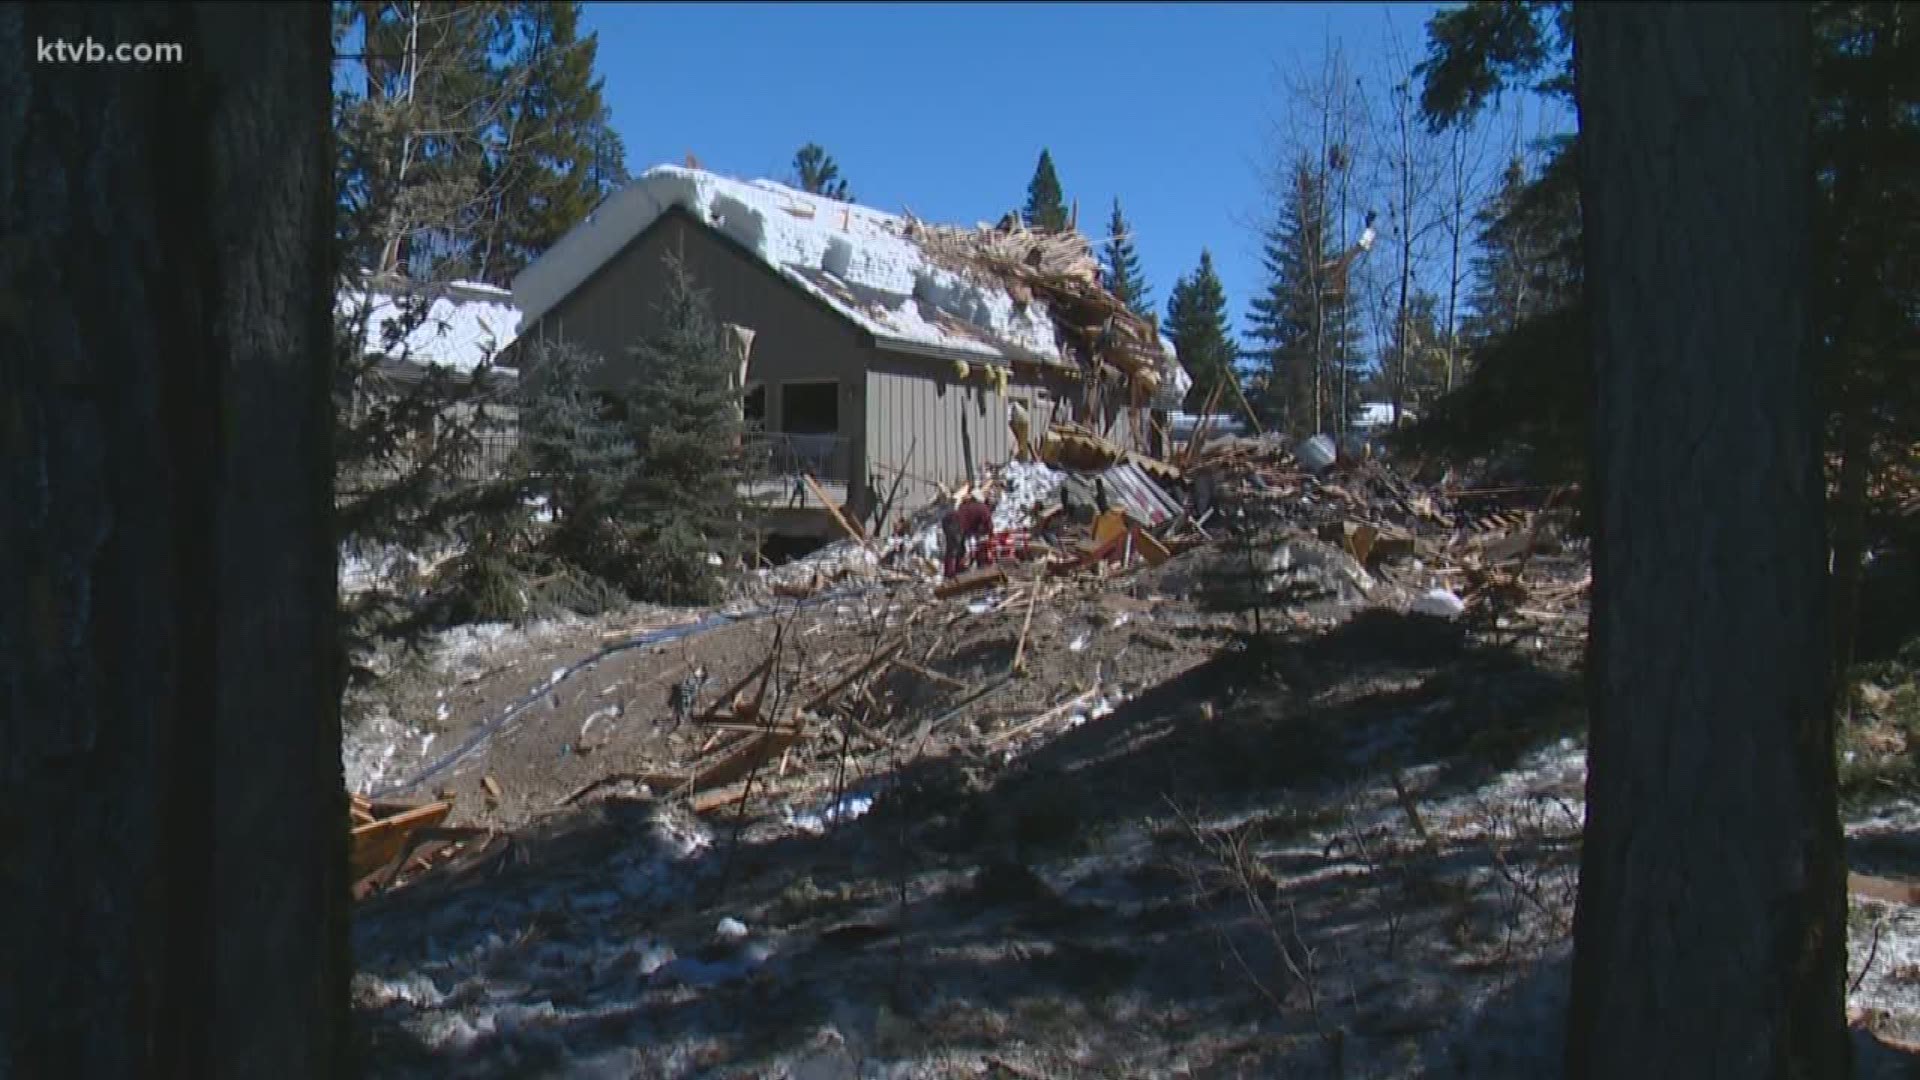 After an undetected propane leak caused a house explosion in McCall, fire officials are speaking out with a safety message to prevent other disasters.